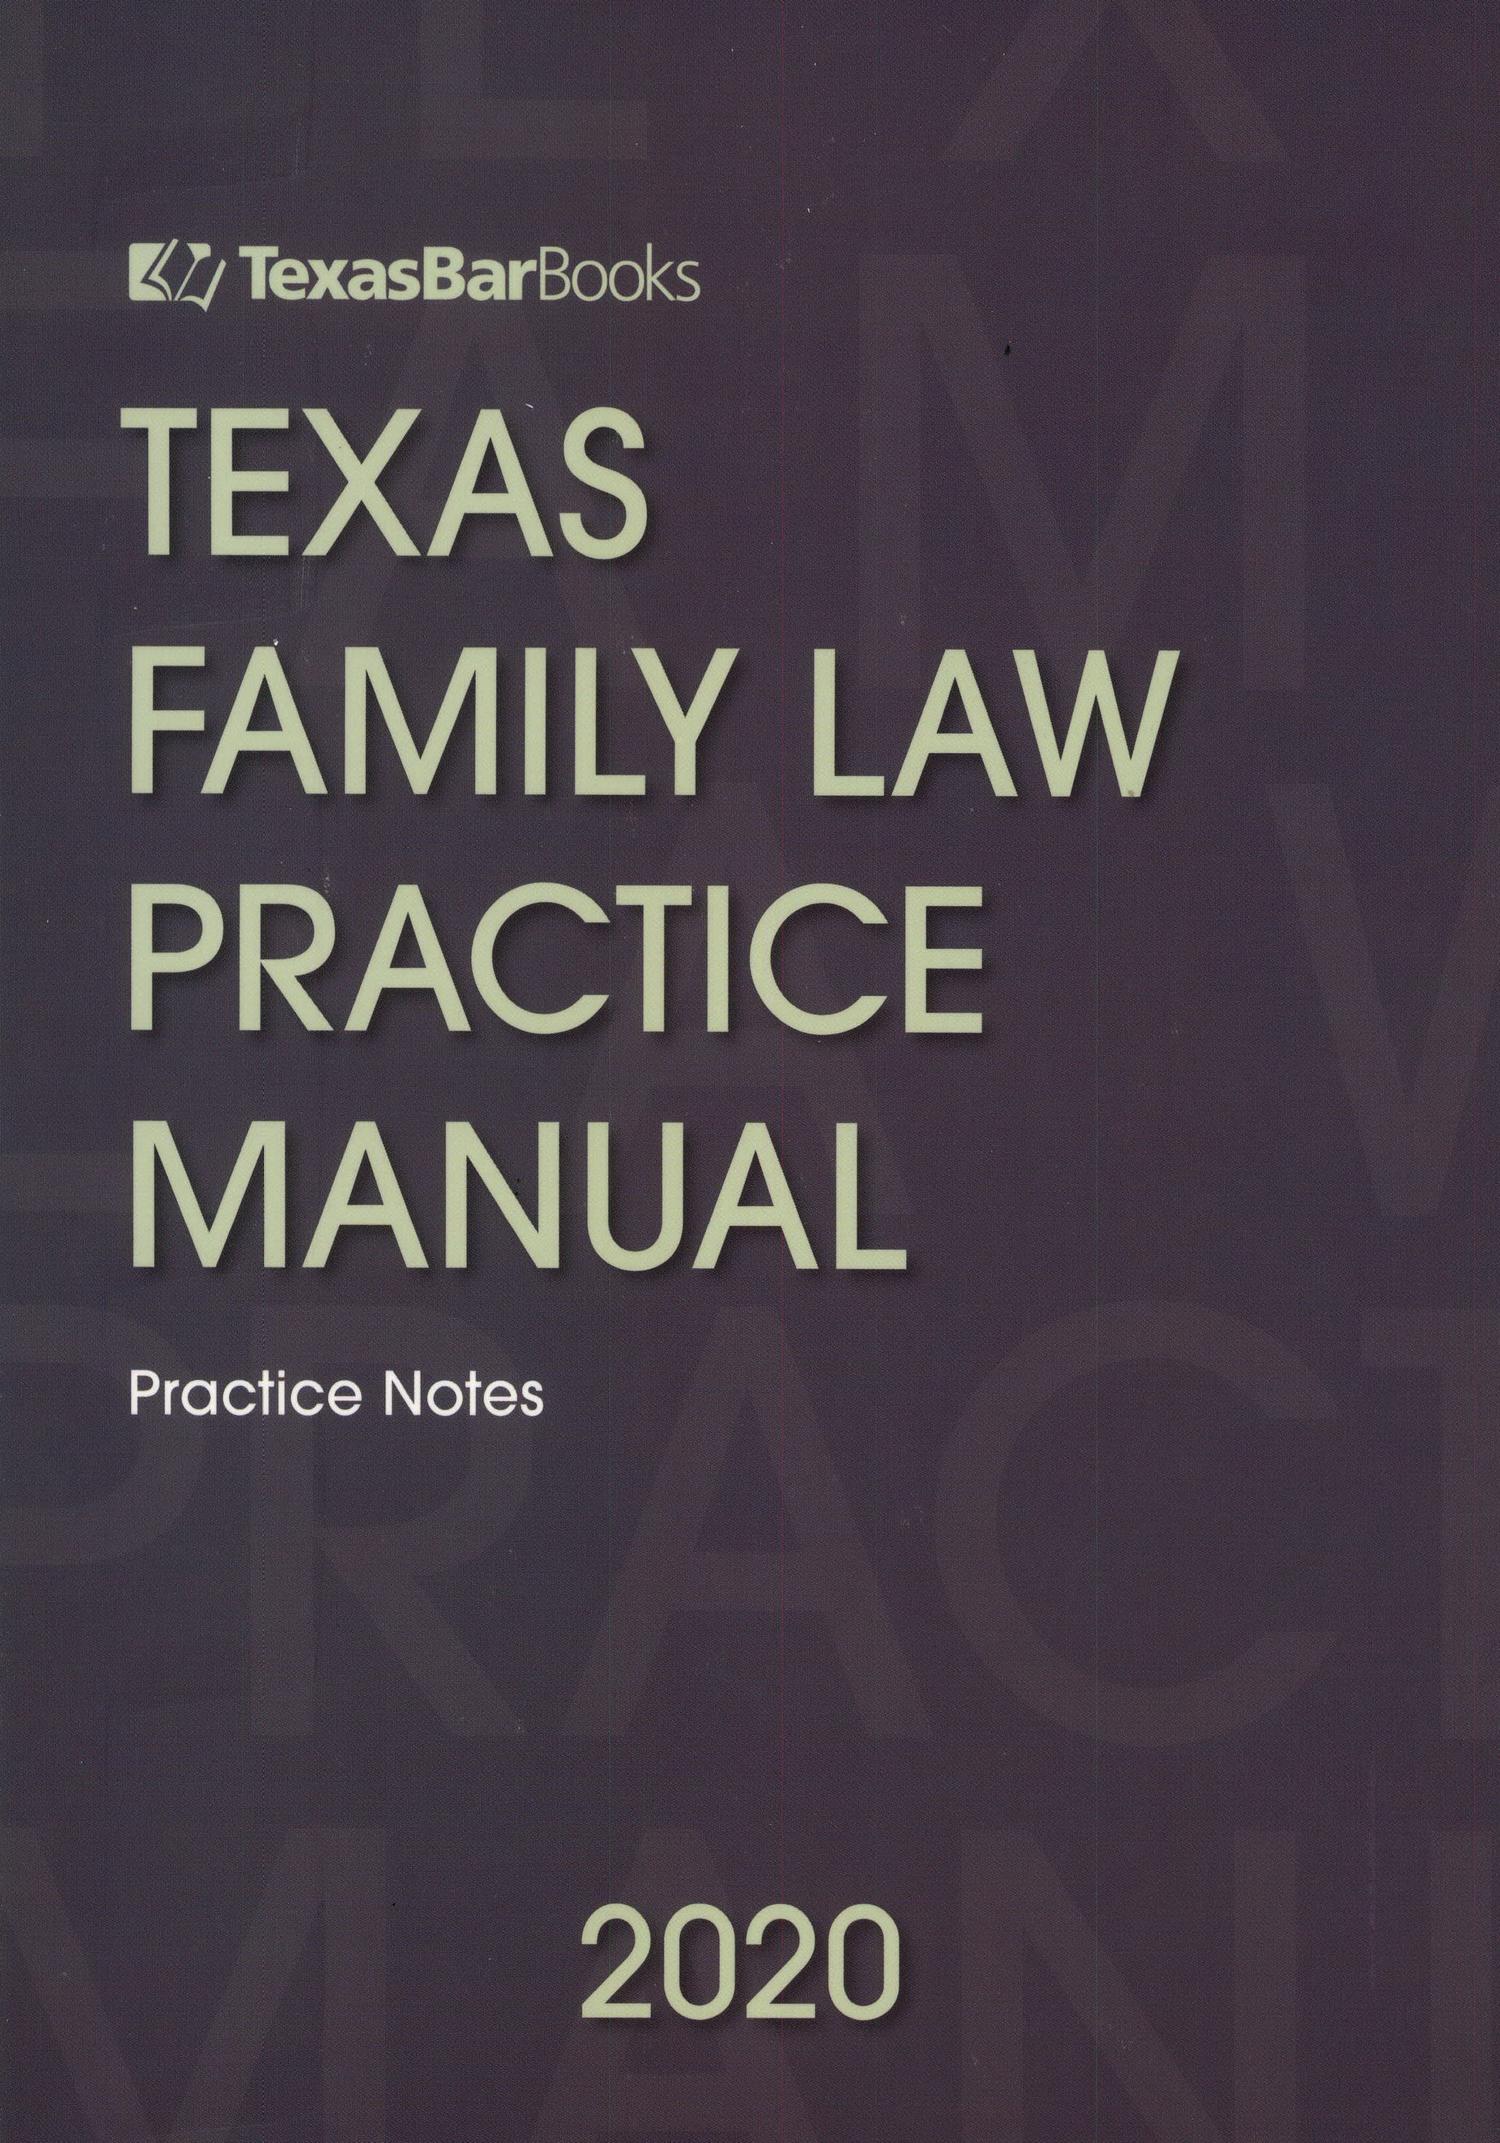 Texas Family Law Practice Manual 2020 Edition, Practice Notes The